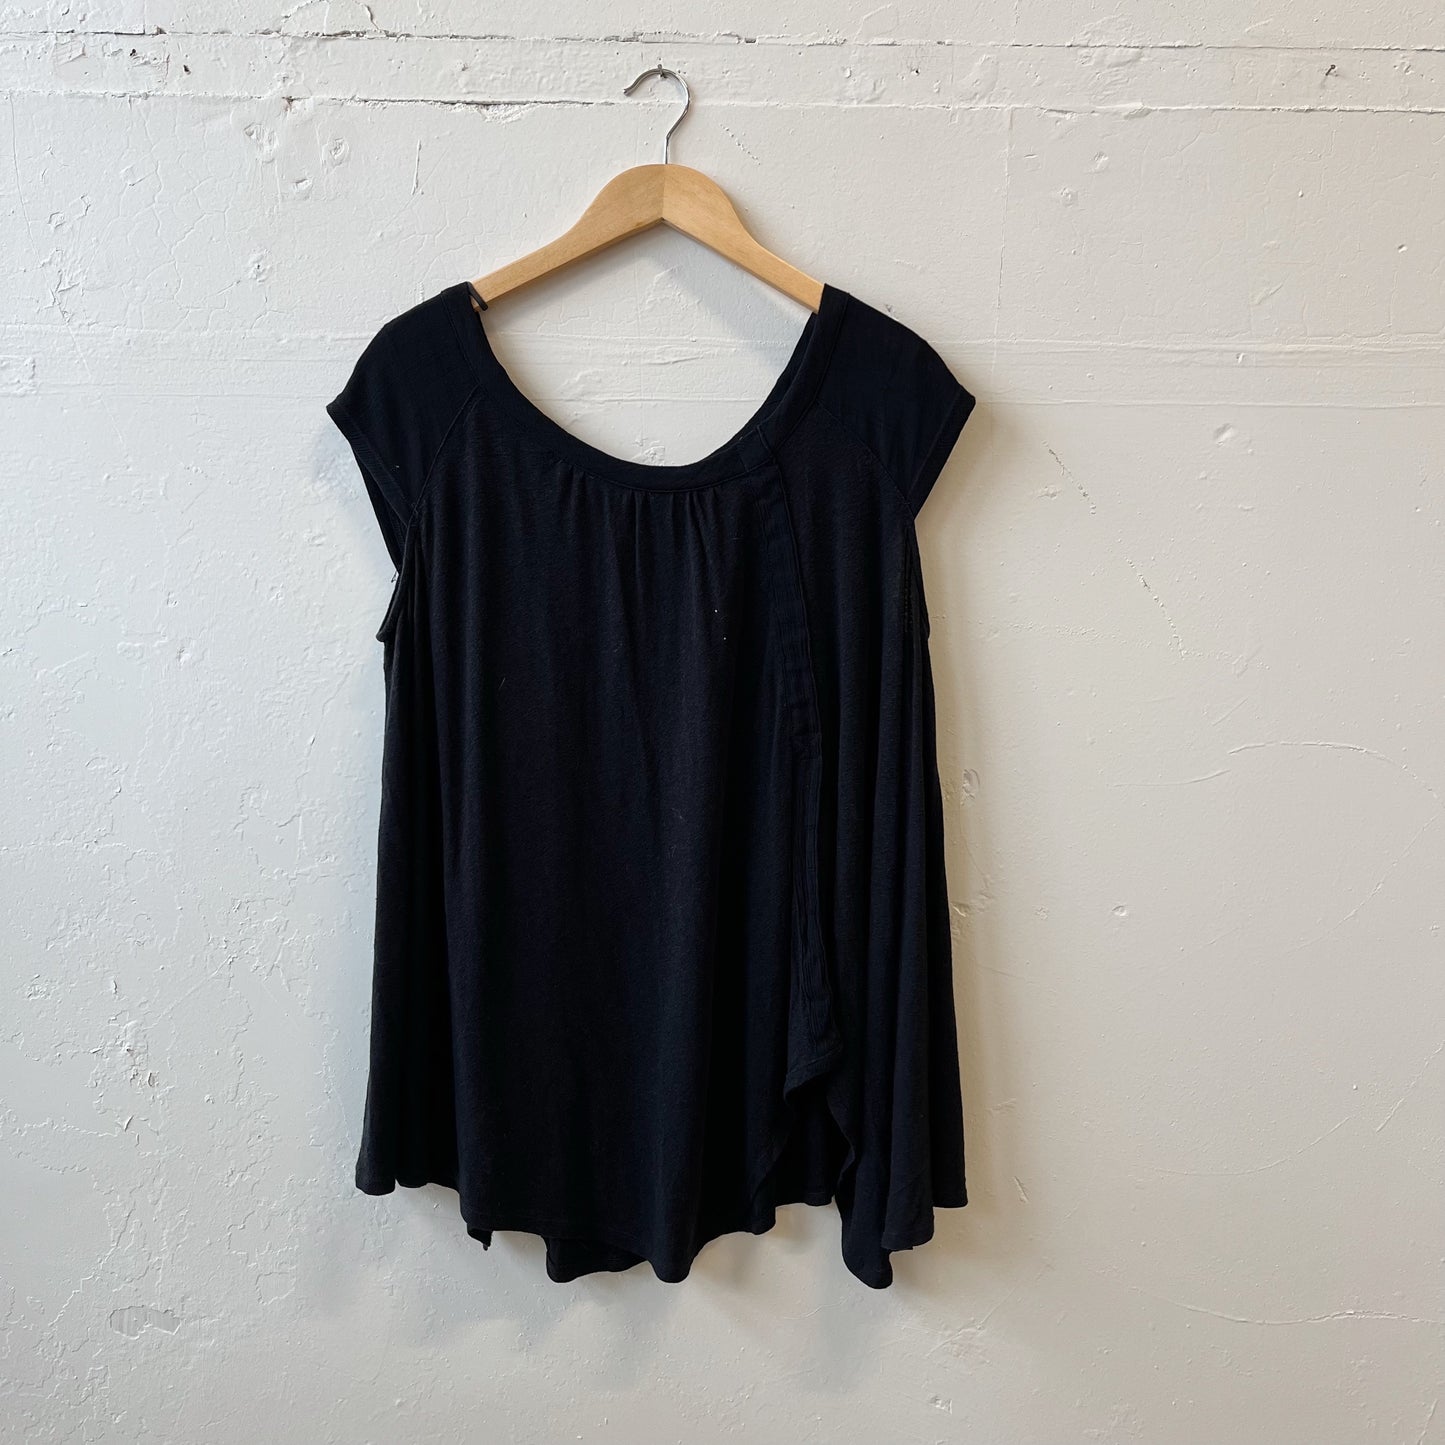 Size S | Free People Black Top